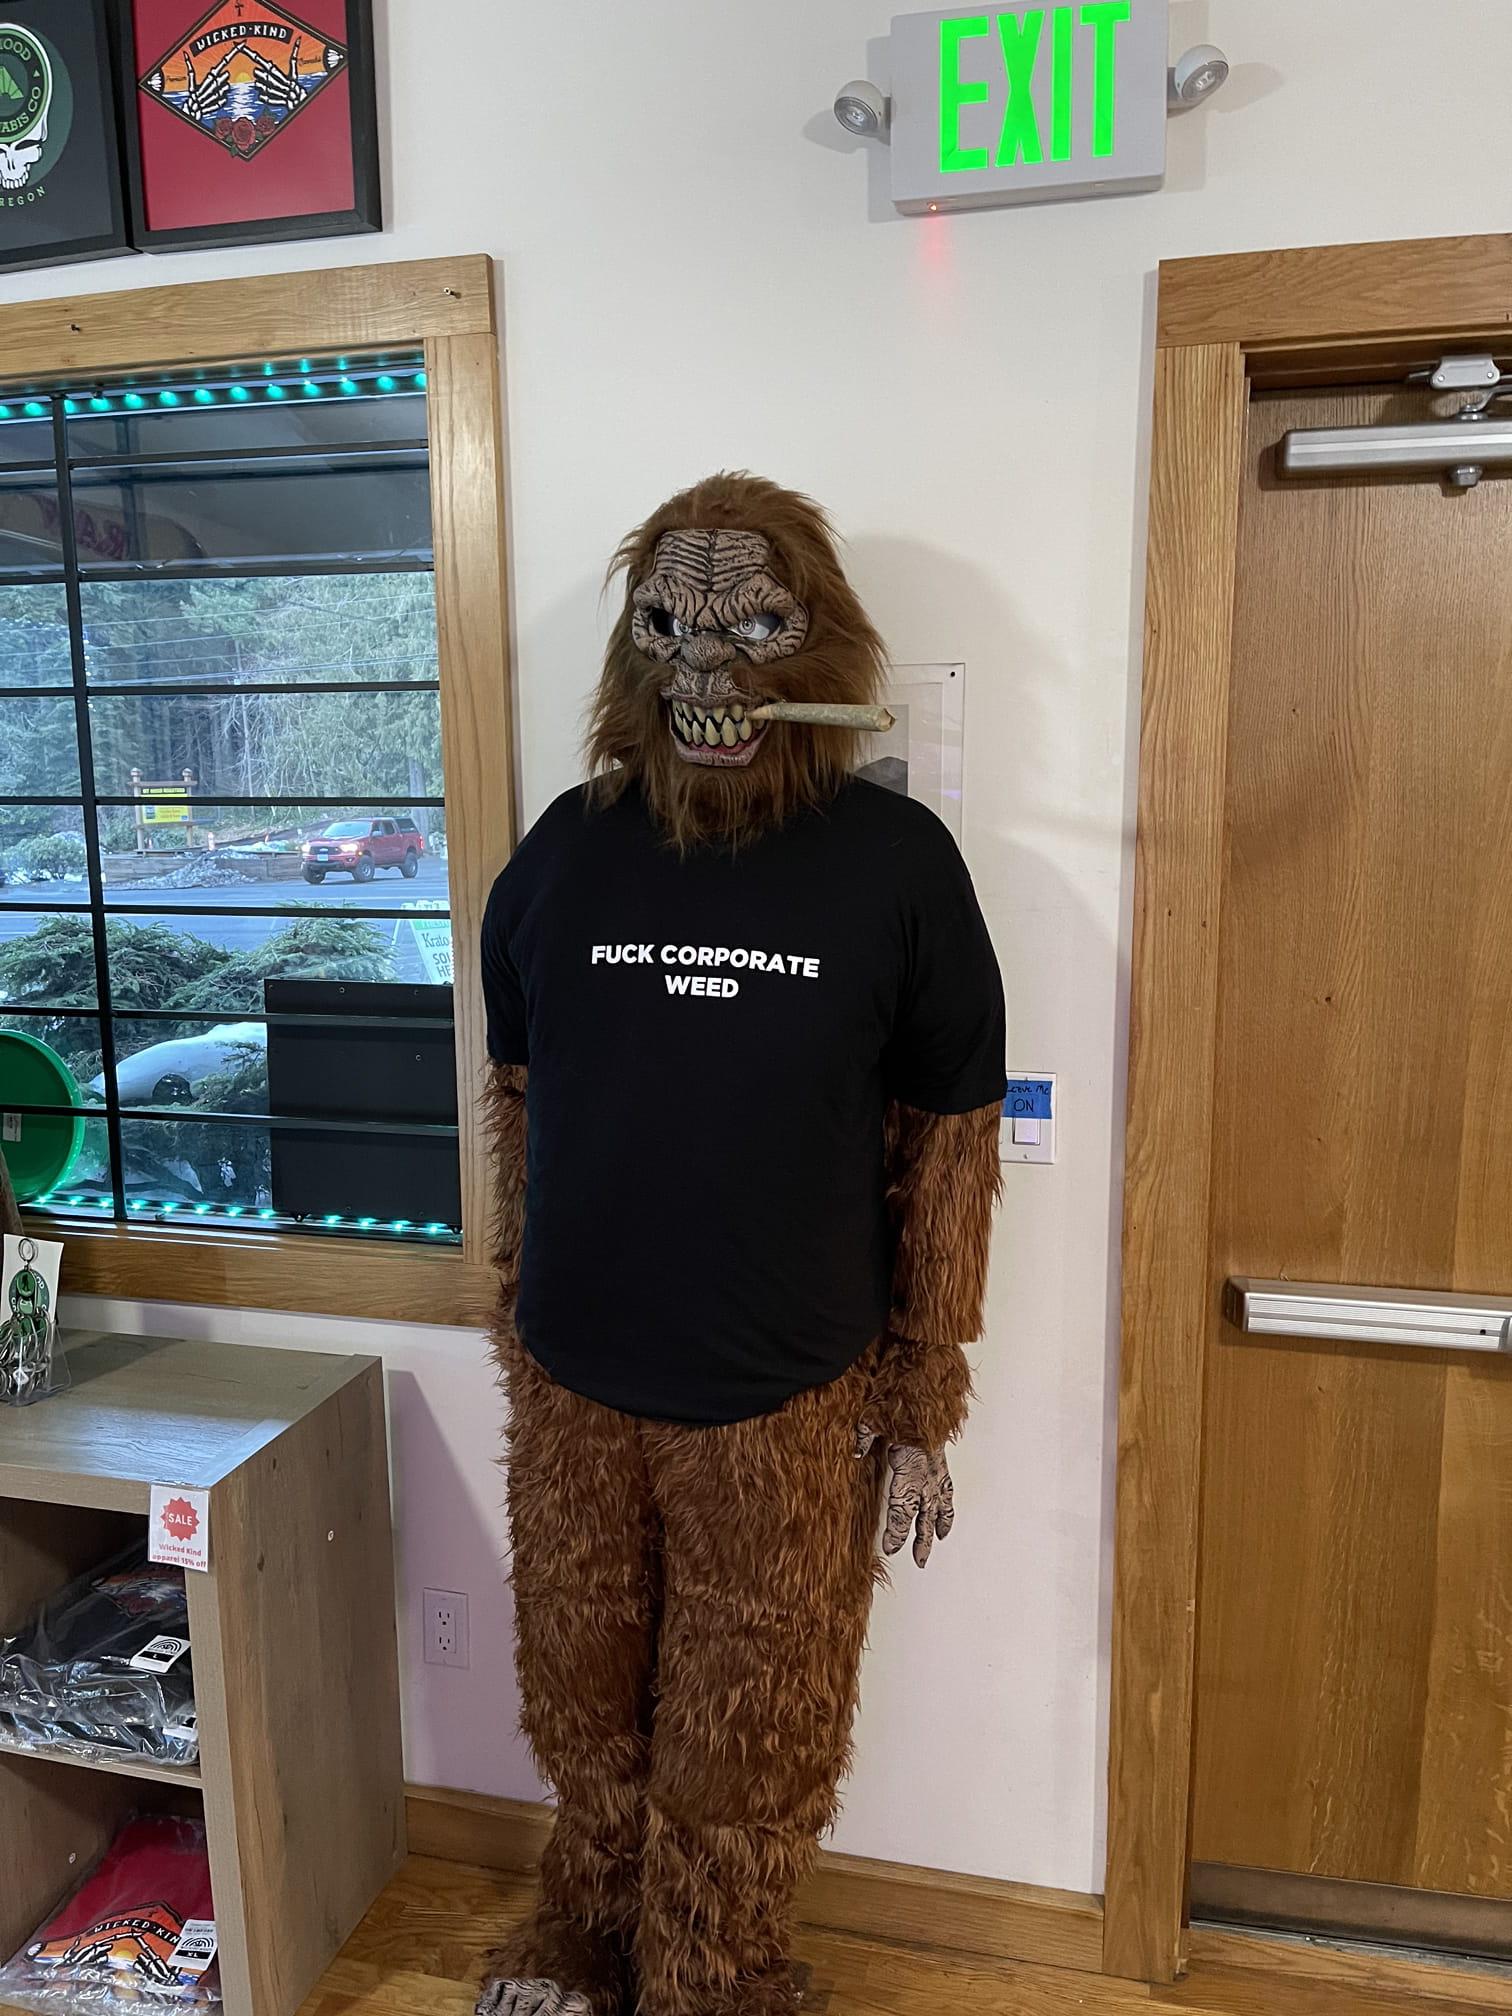 But why is it a caveman? Taken at weed store - mt hood cannabis co